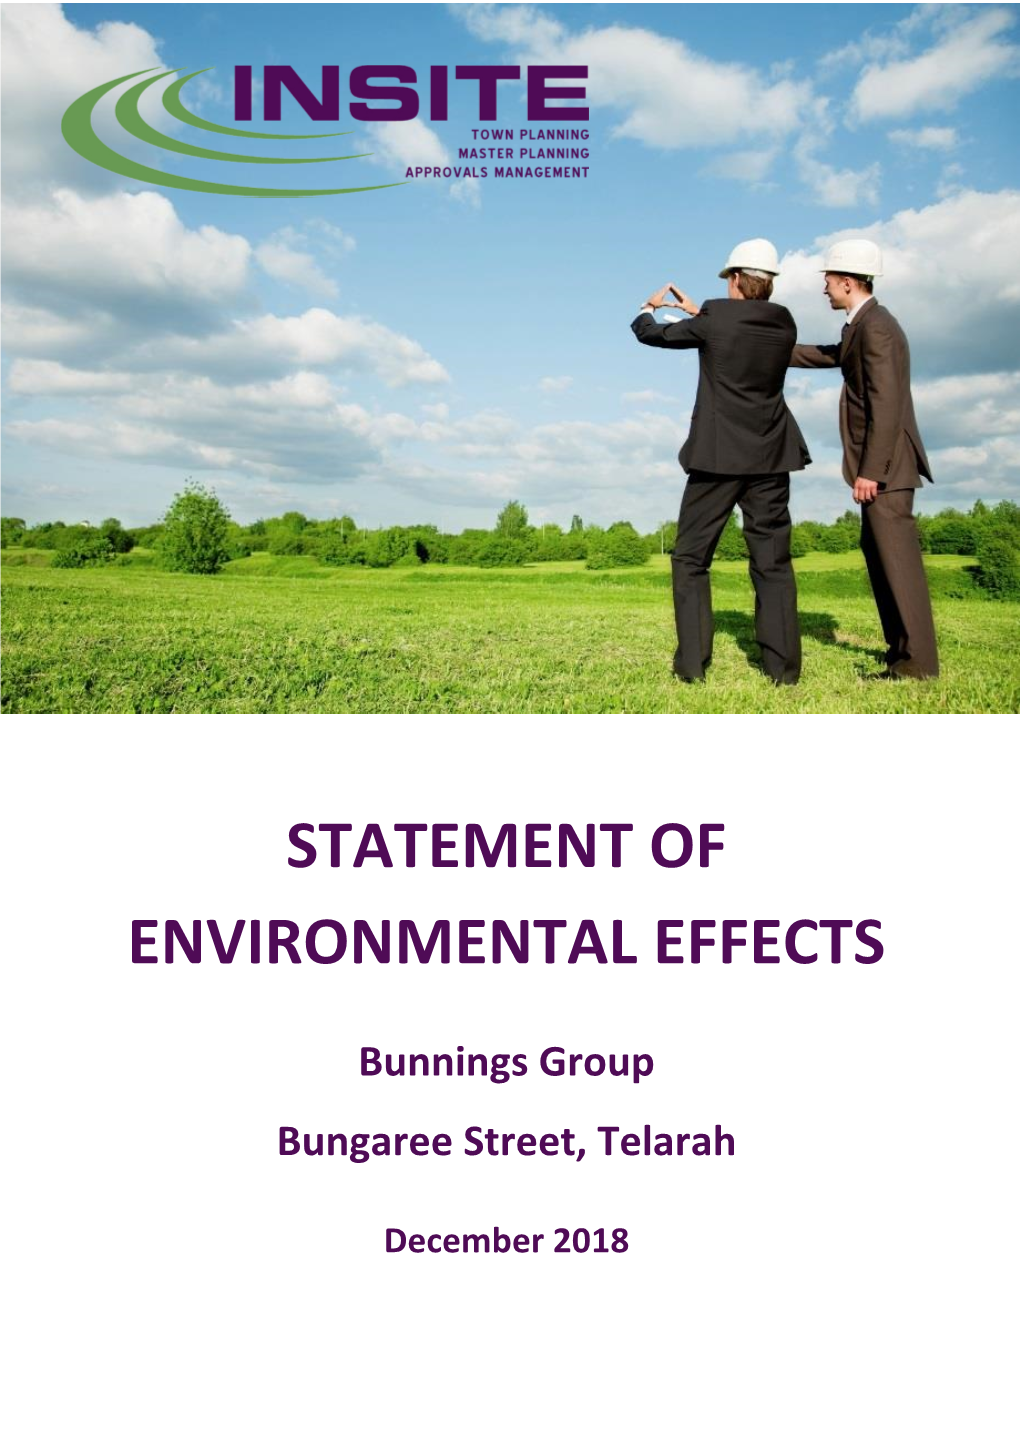 Statement of Environmental Effects